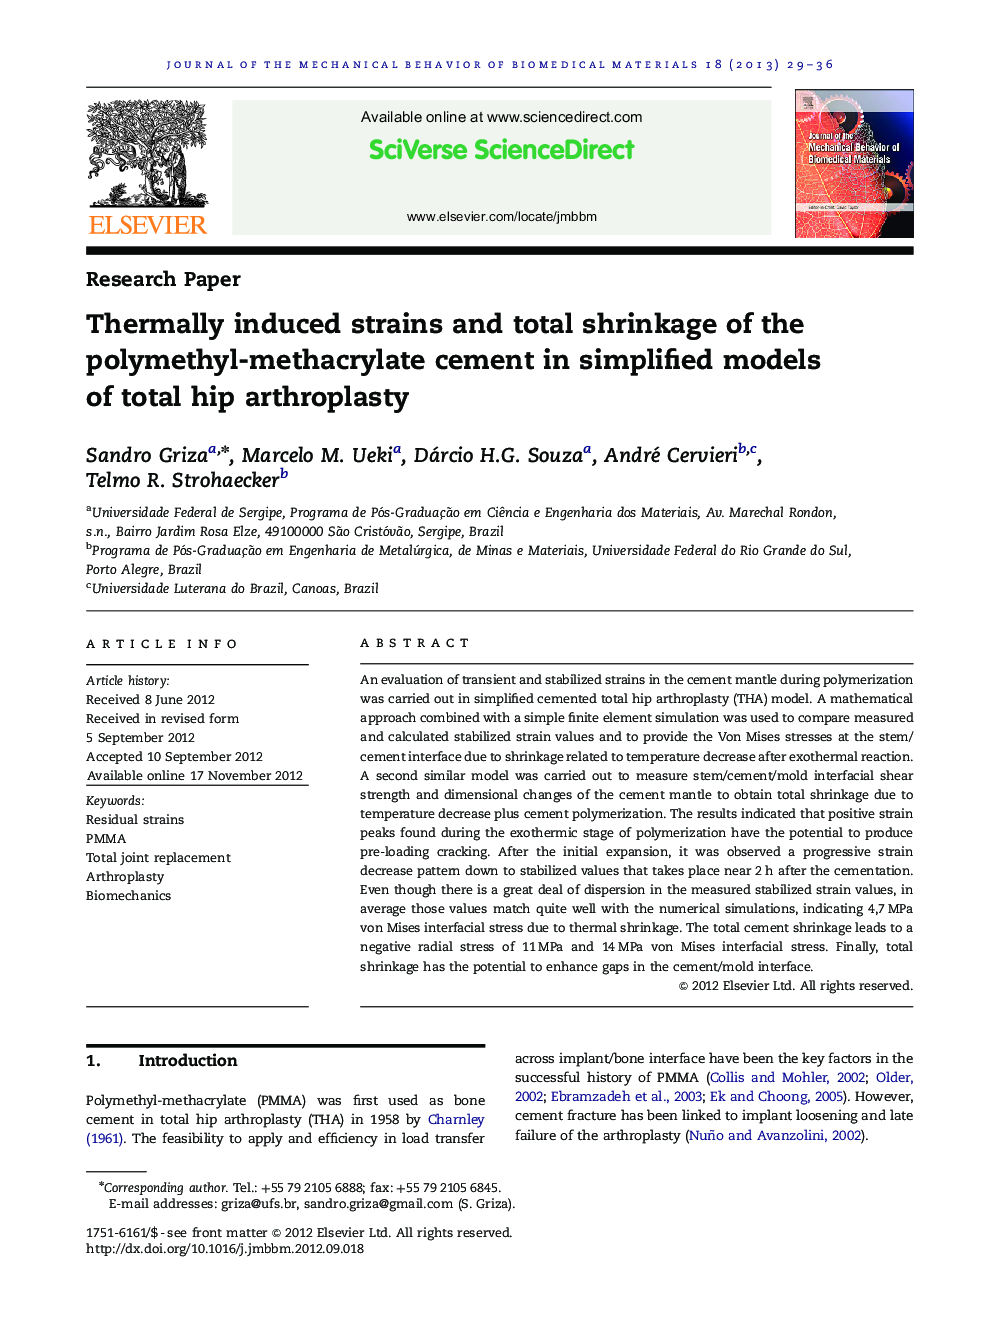 Thermally induced strains and total shrinkage of the polymethyl-methacrylate cement in simplified models of total hip arthroplasty